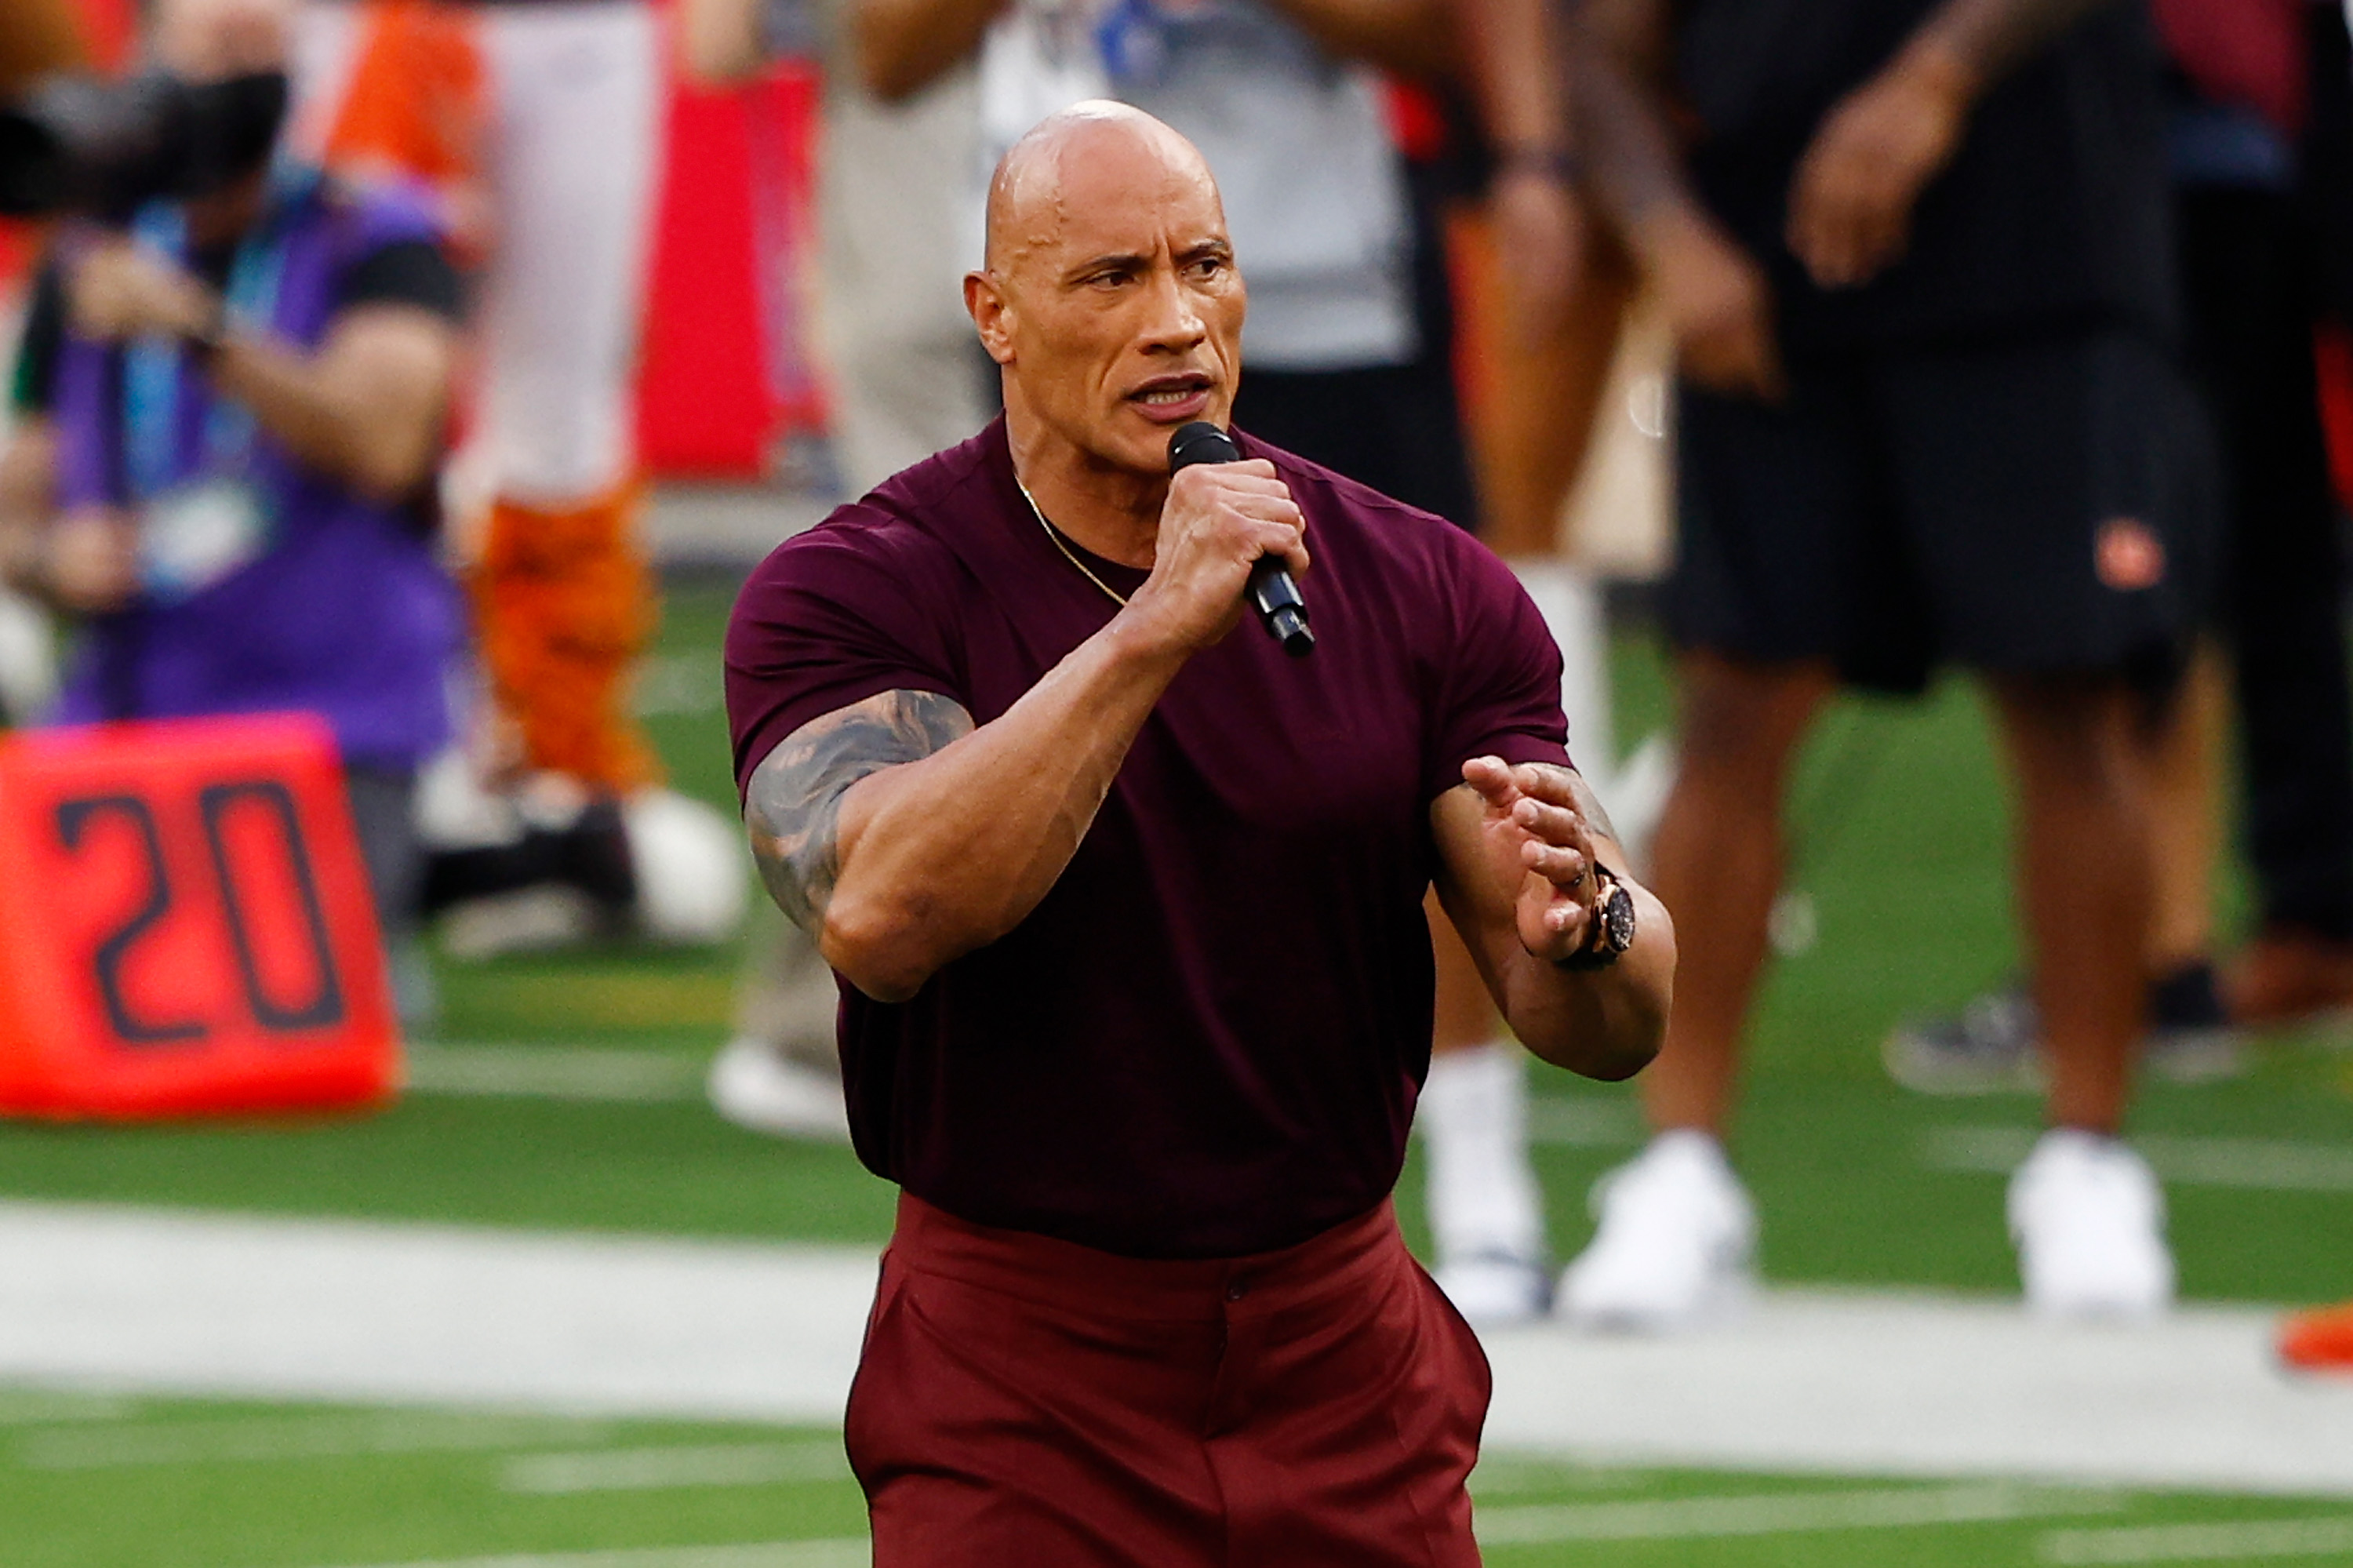 the rock at the super bowl